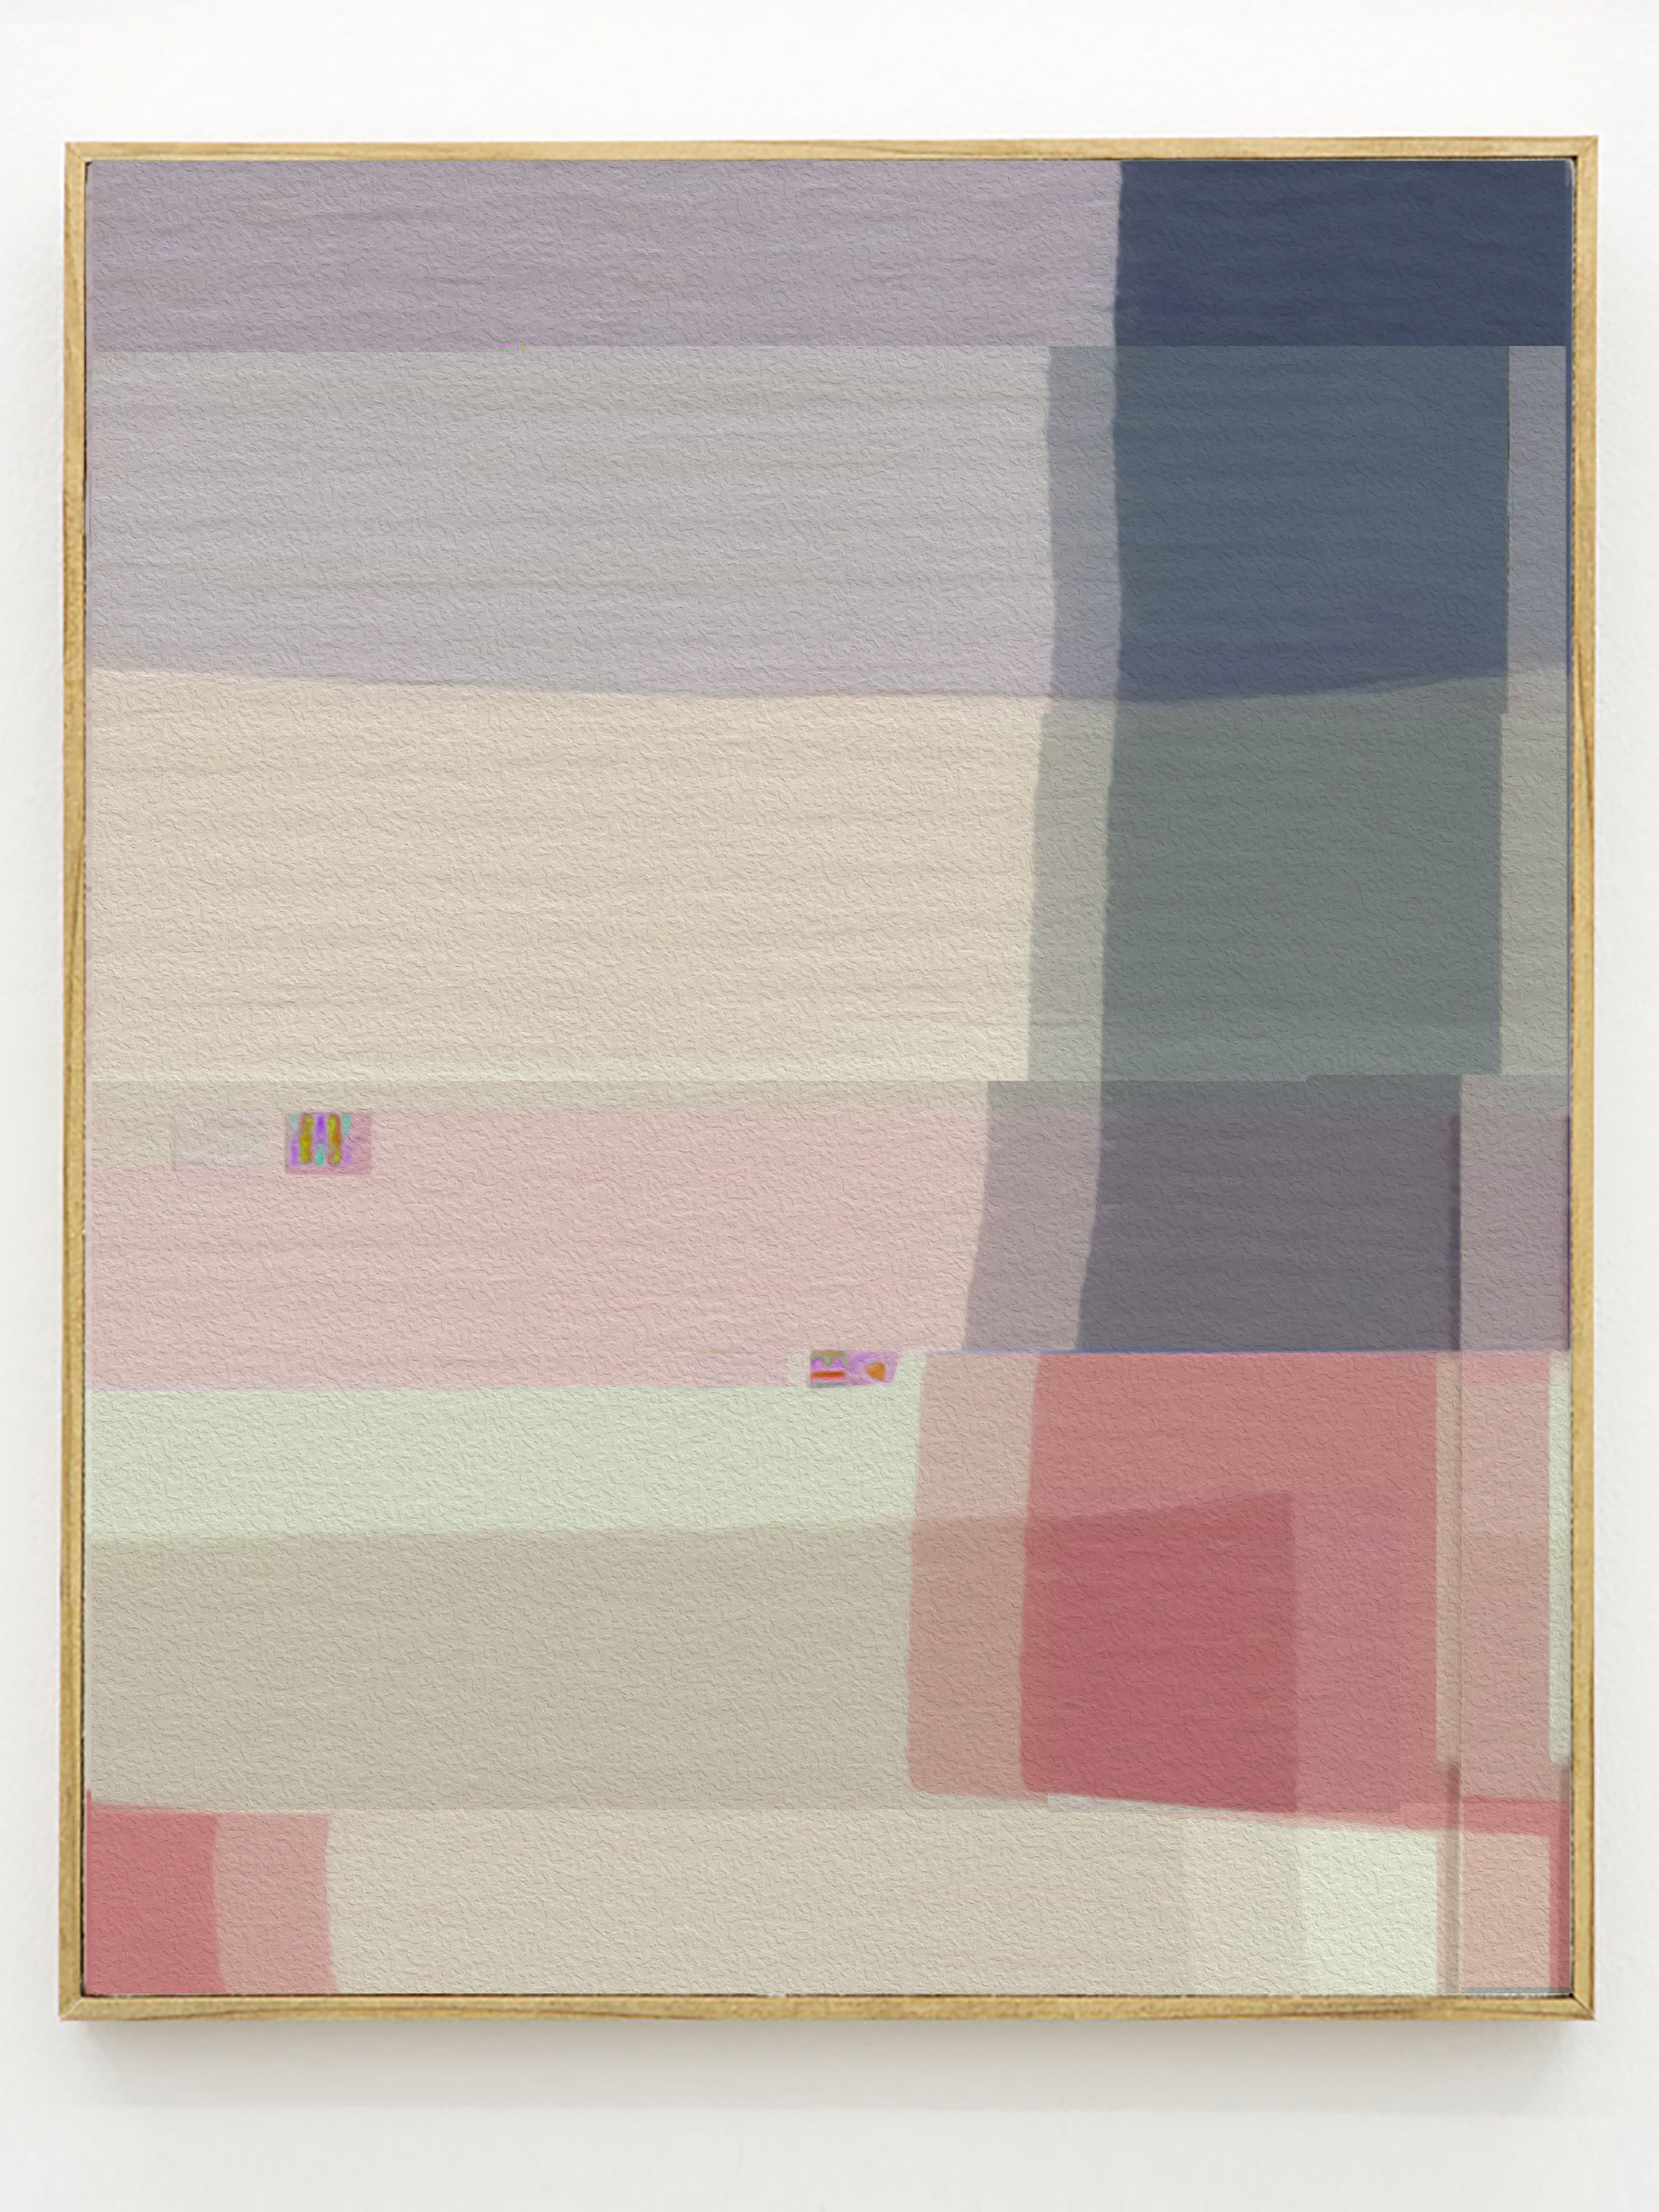   GLITCH QUILT #3   digital print on cotton broadcloth   12 x 16 inches, 2014  